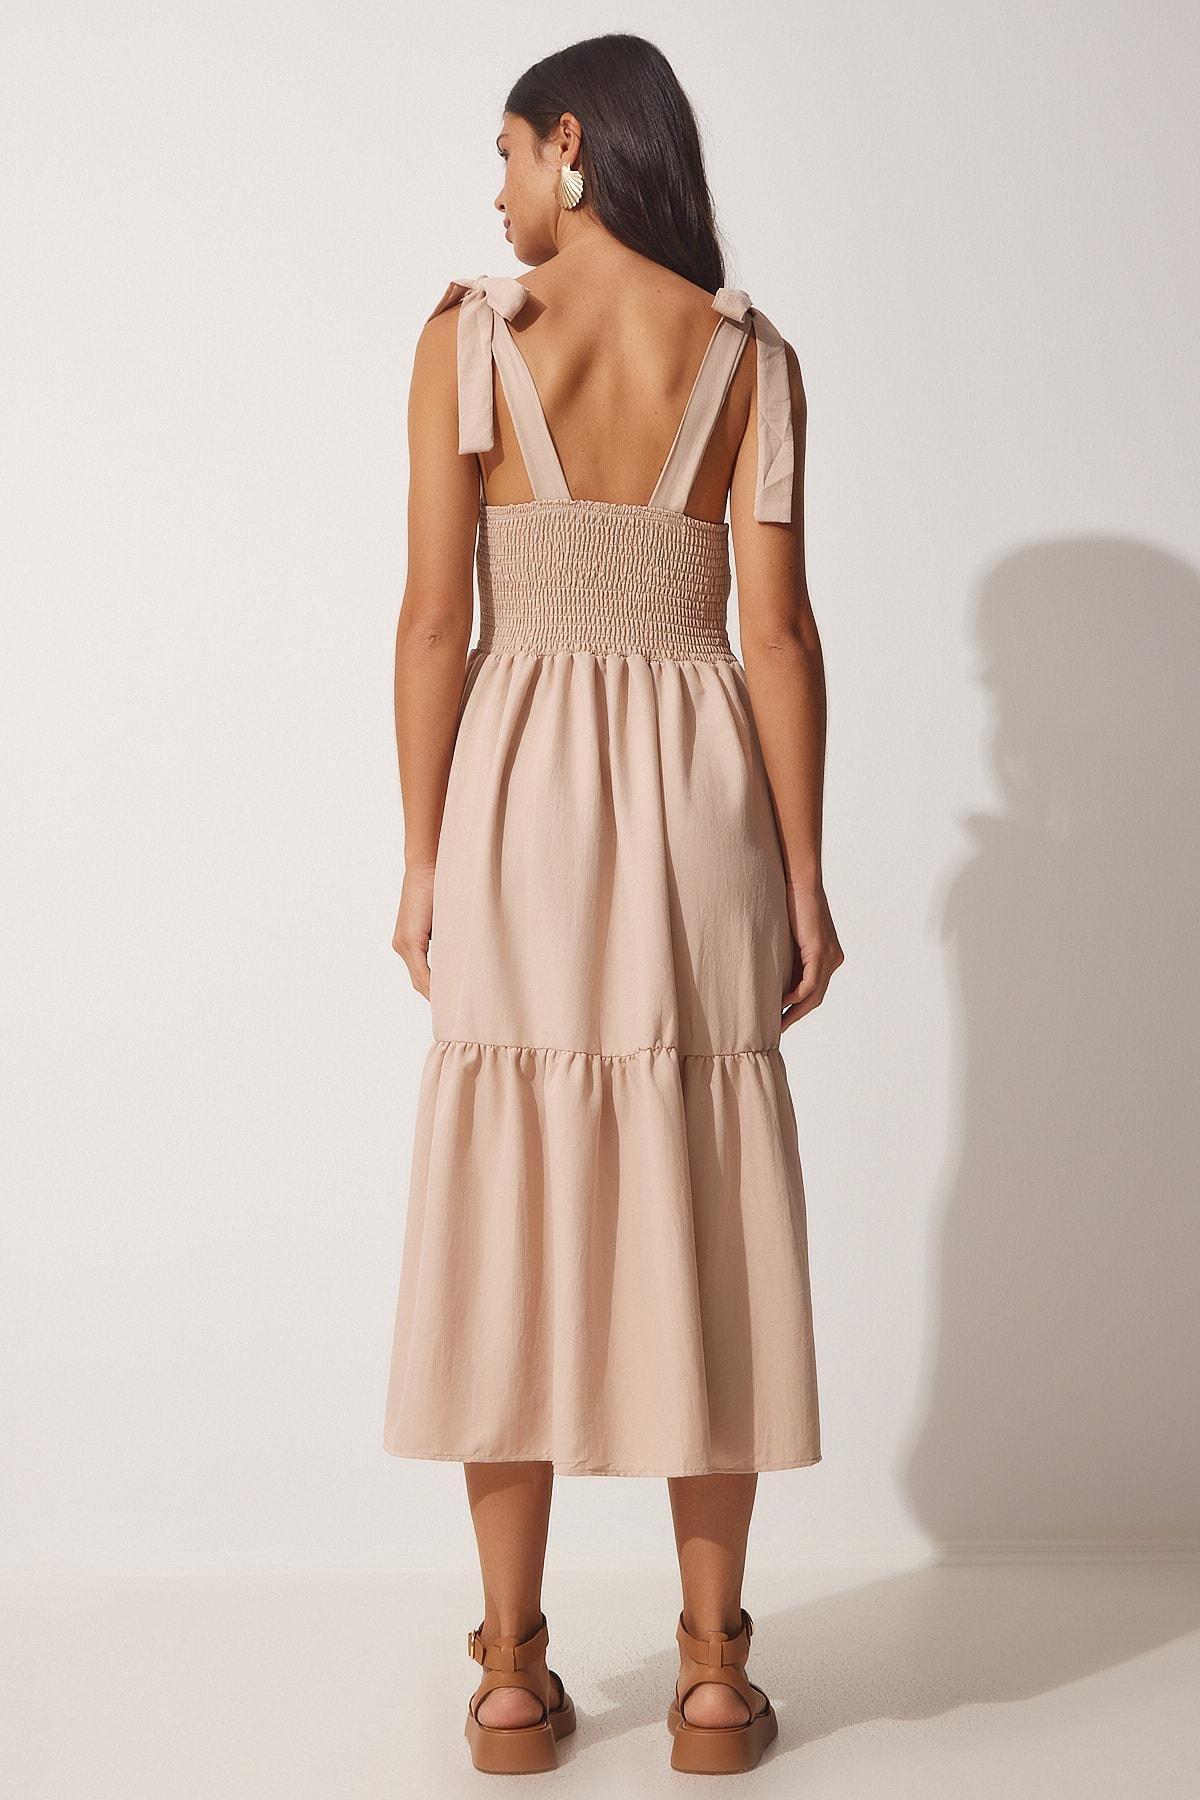 Happiness Istanbul - Beige A-Line Dress